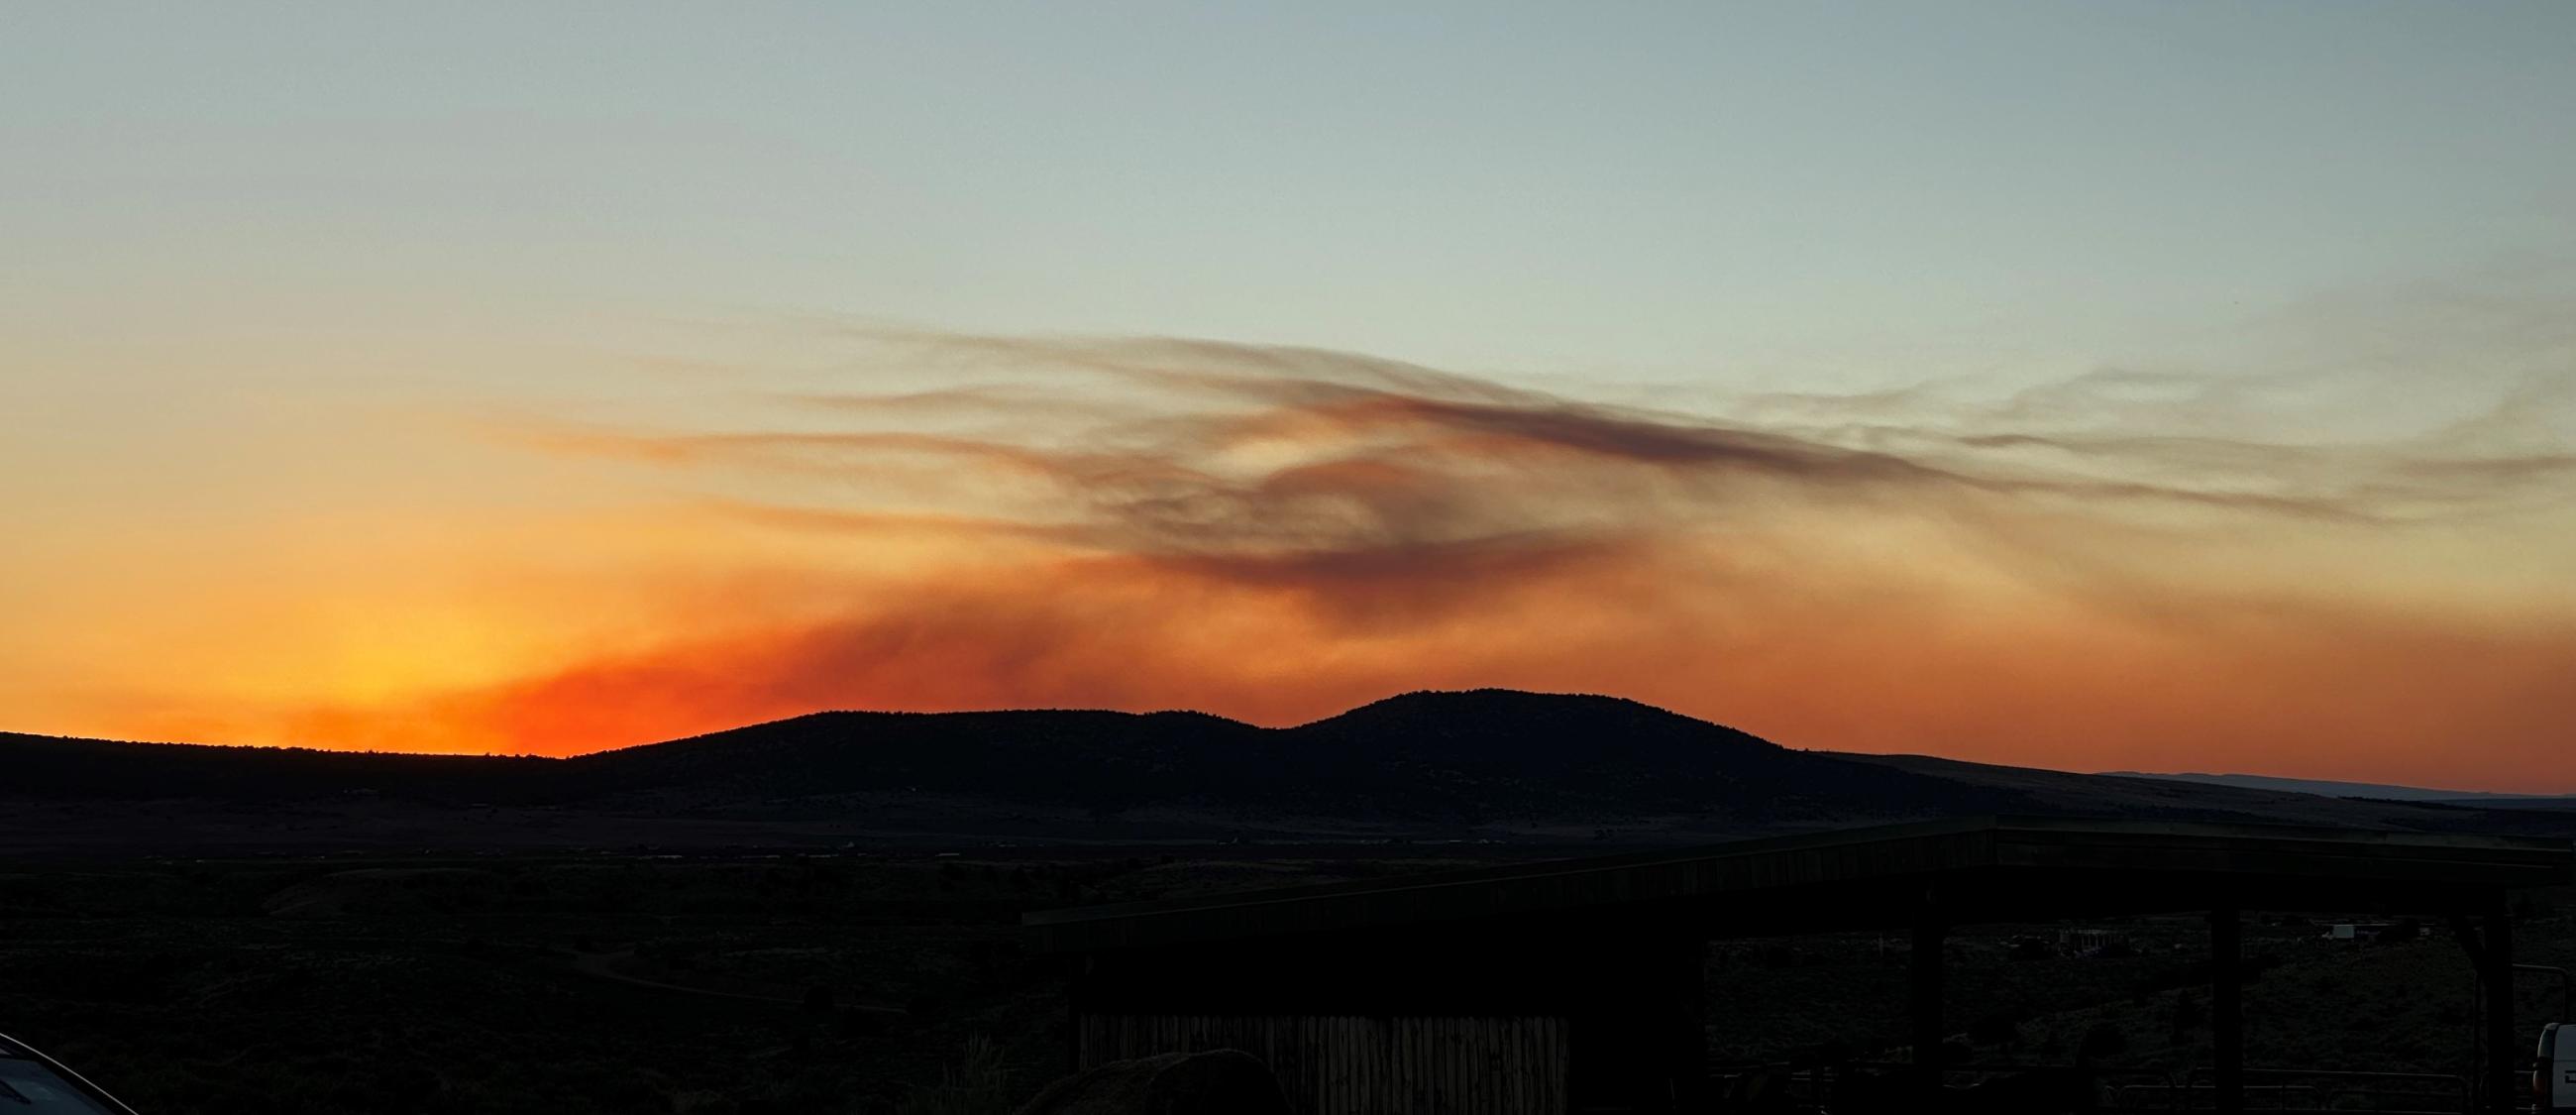 Smoke rises behind silhouetted hills at sunset.